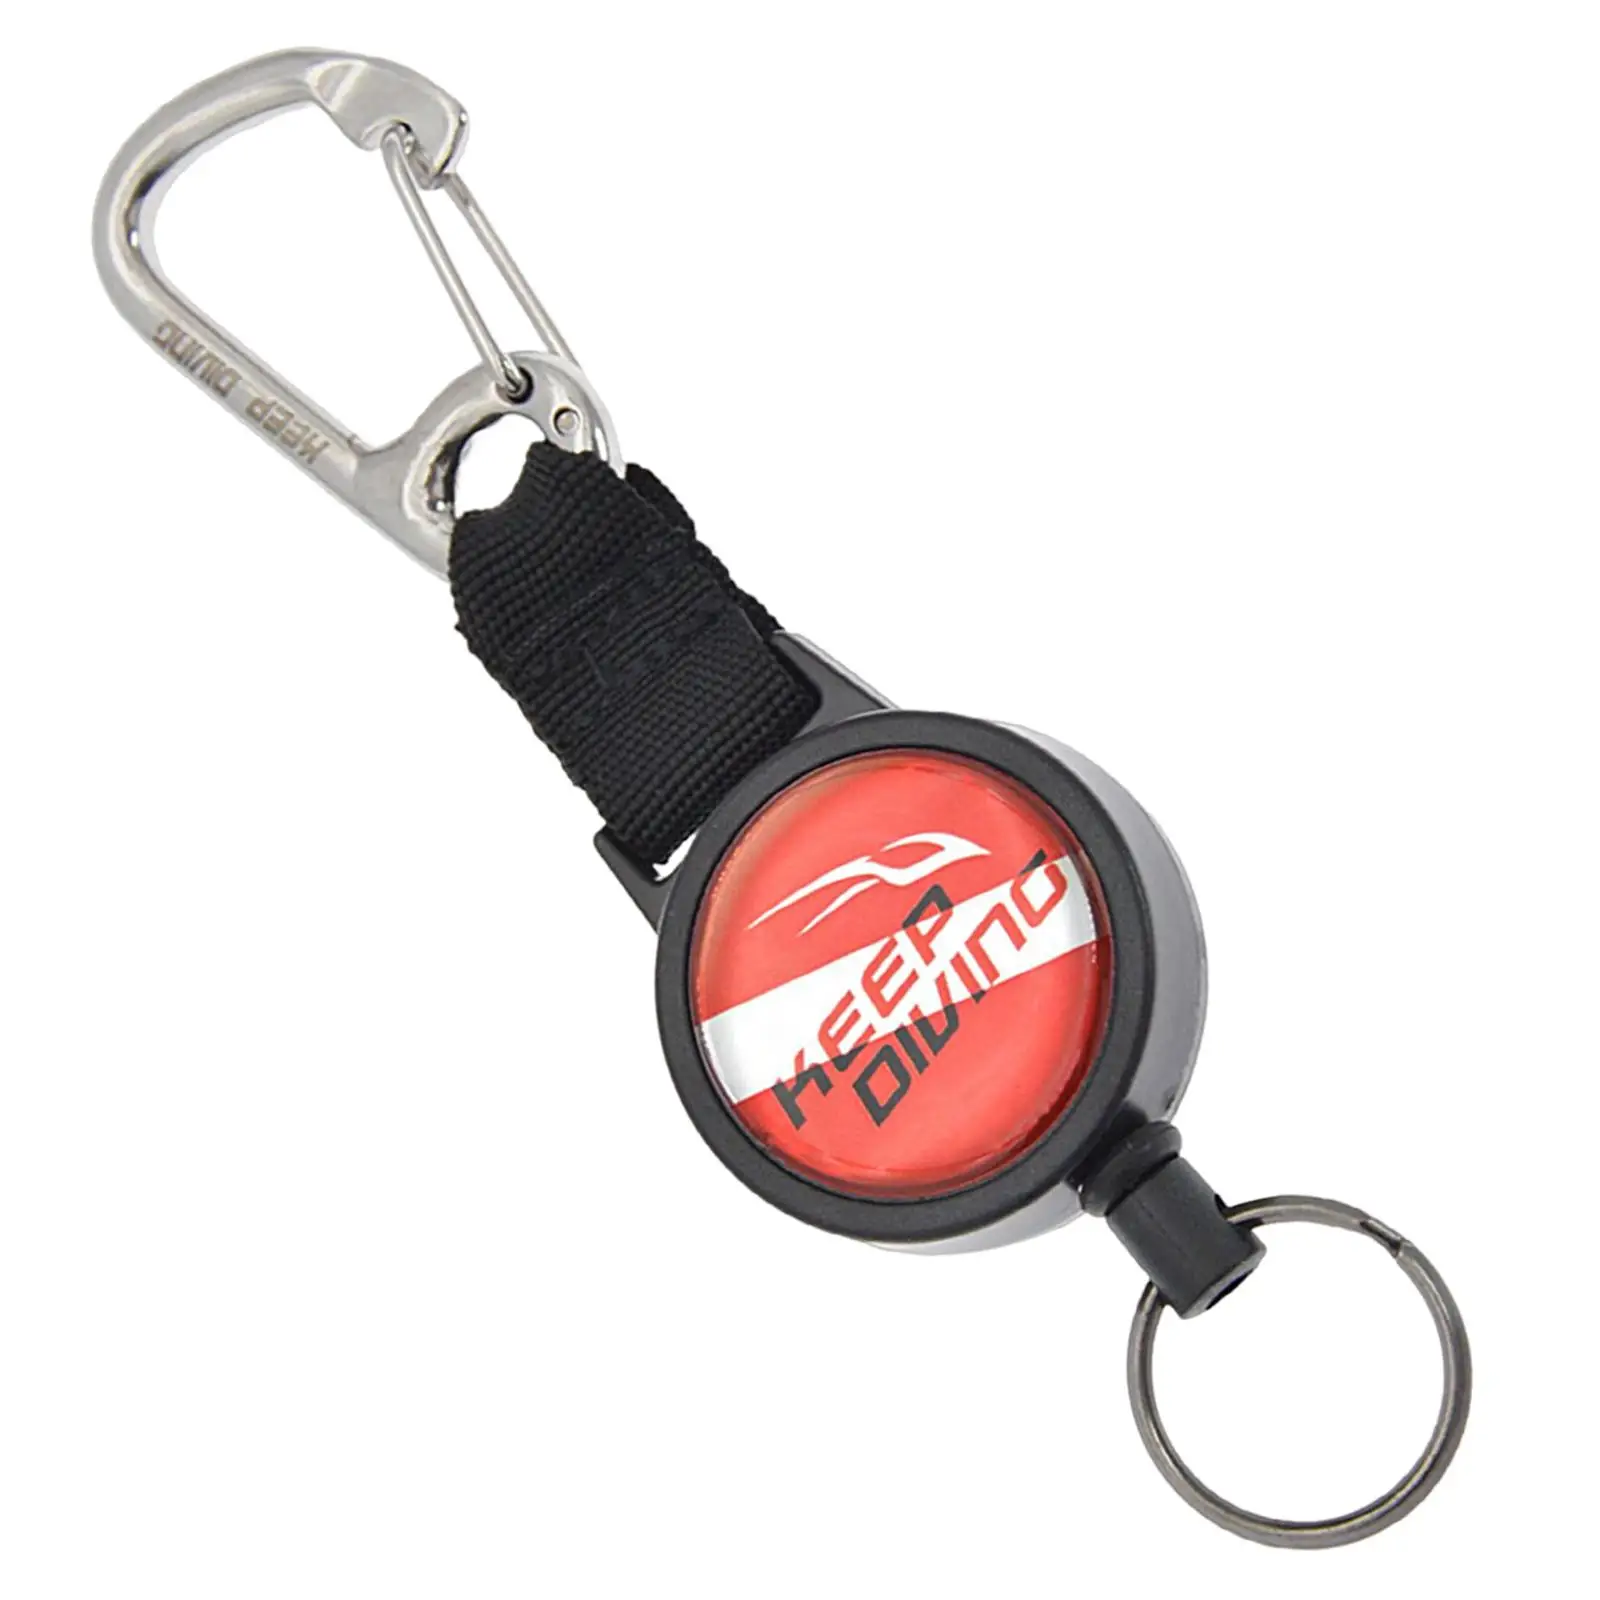 Diving Retractable Lanyard Dive Retractor Diving Gear Hook for BCD/Mask/Light Holder Clip Water Sports